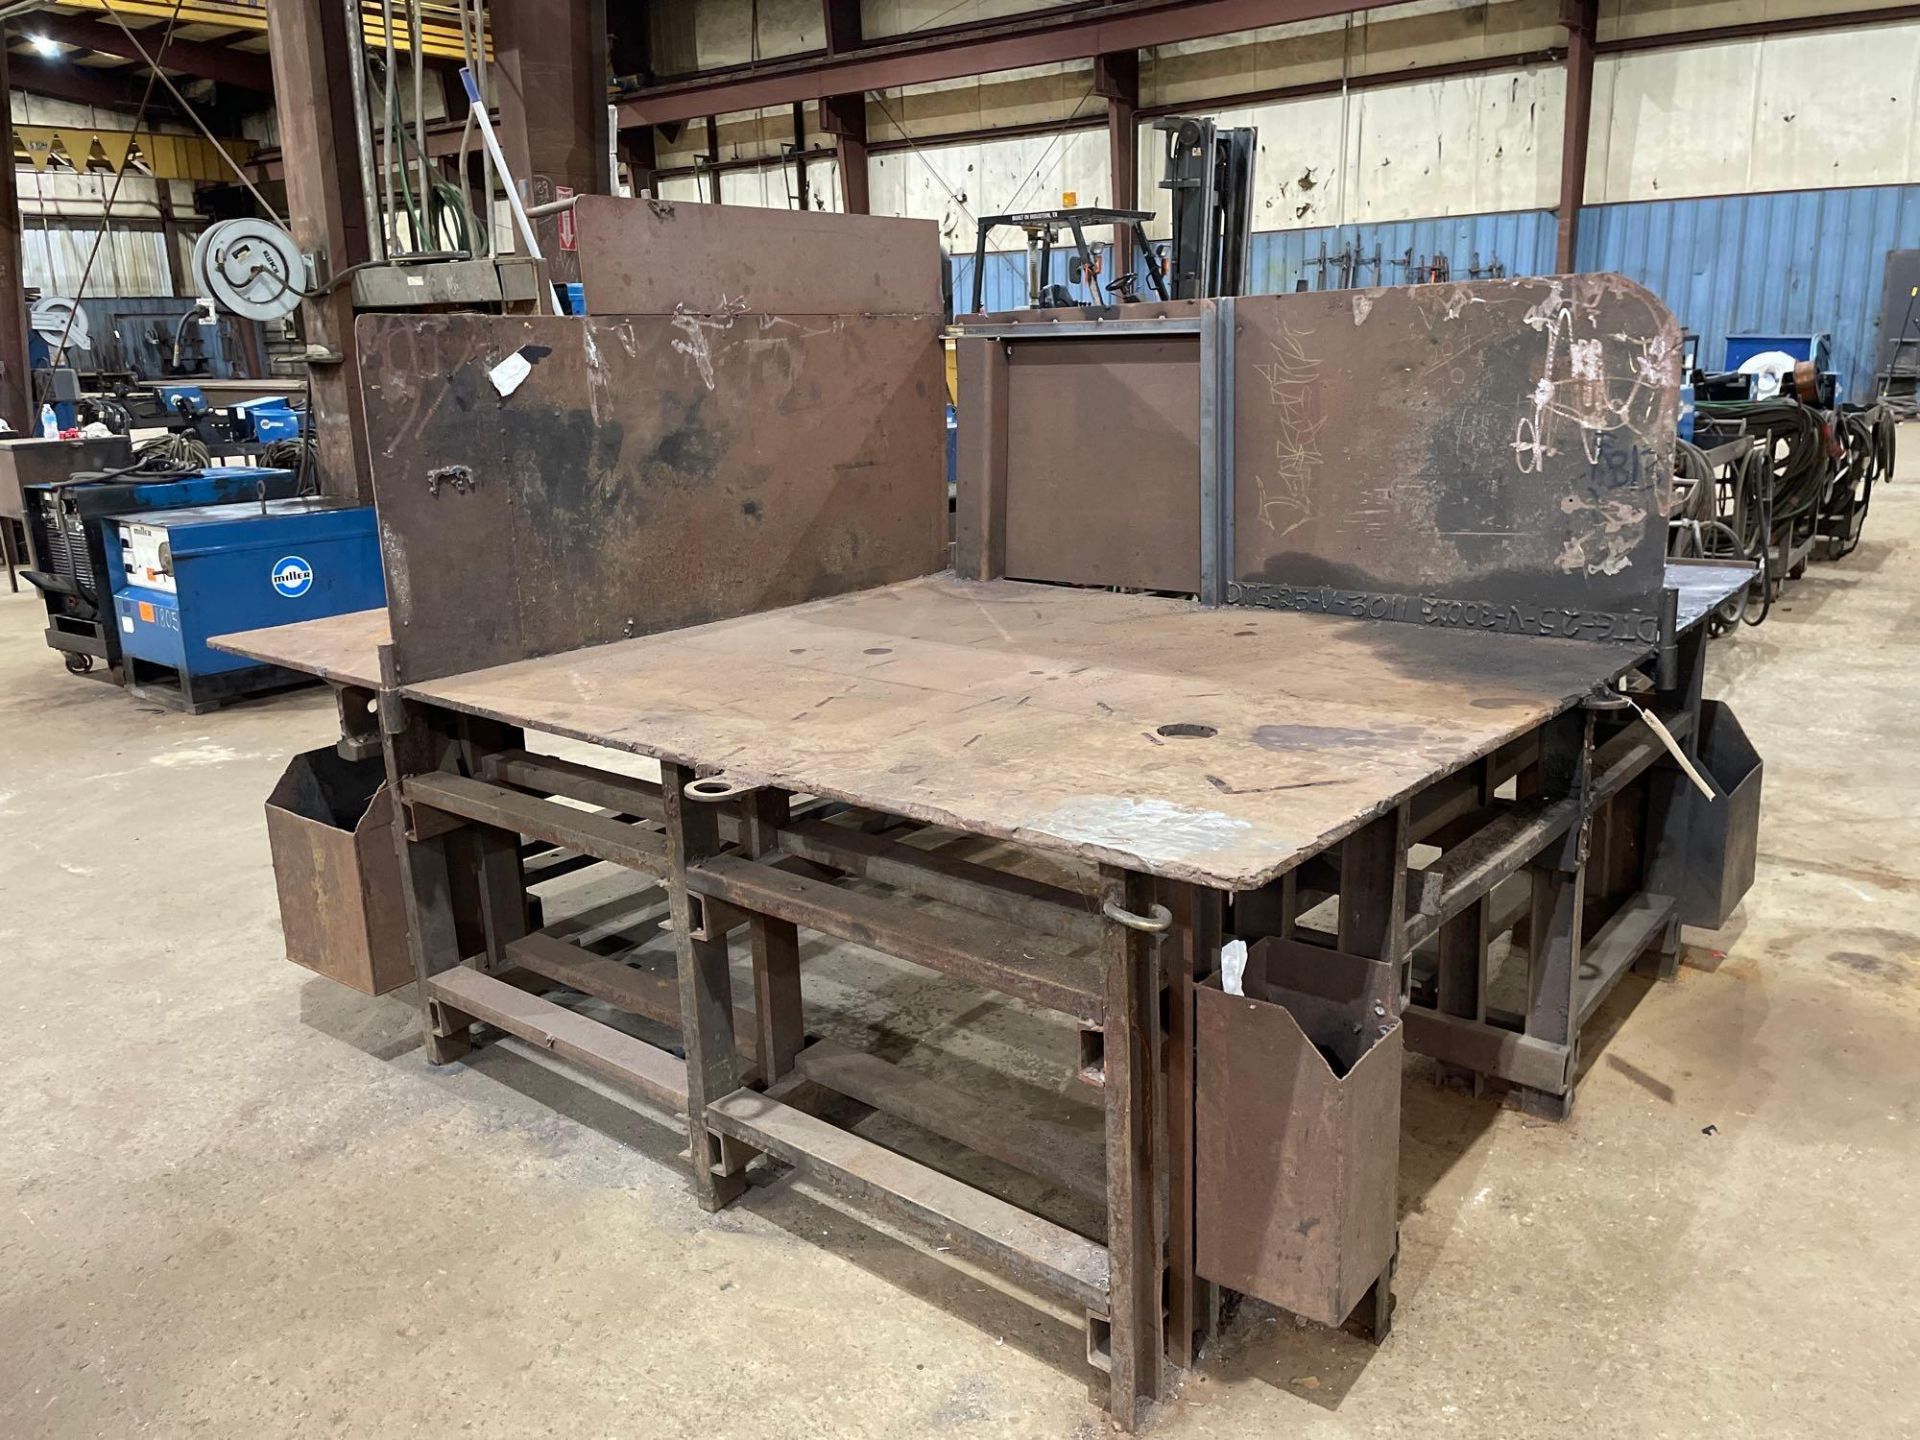 H.D. Metal Welding Table, 1/2” Thick Top, 94” X 91” X 32” - Image 3 of 6